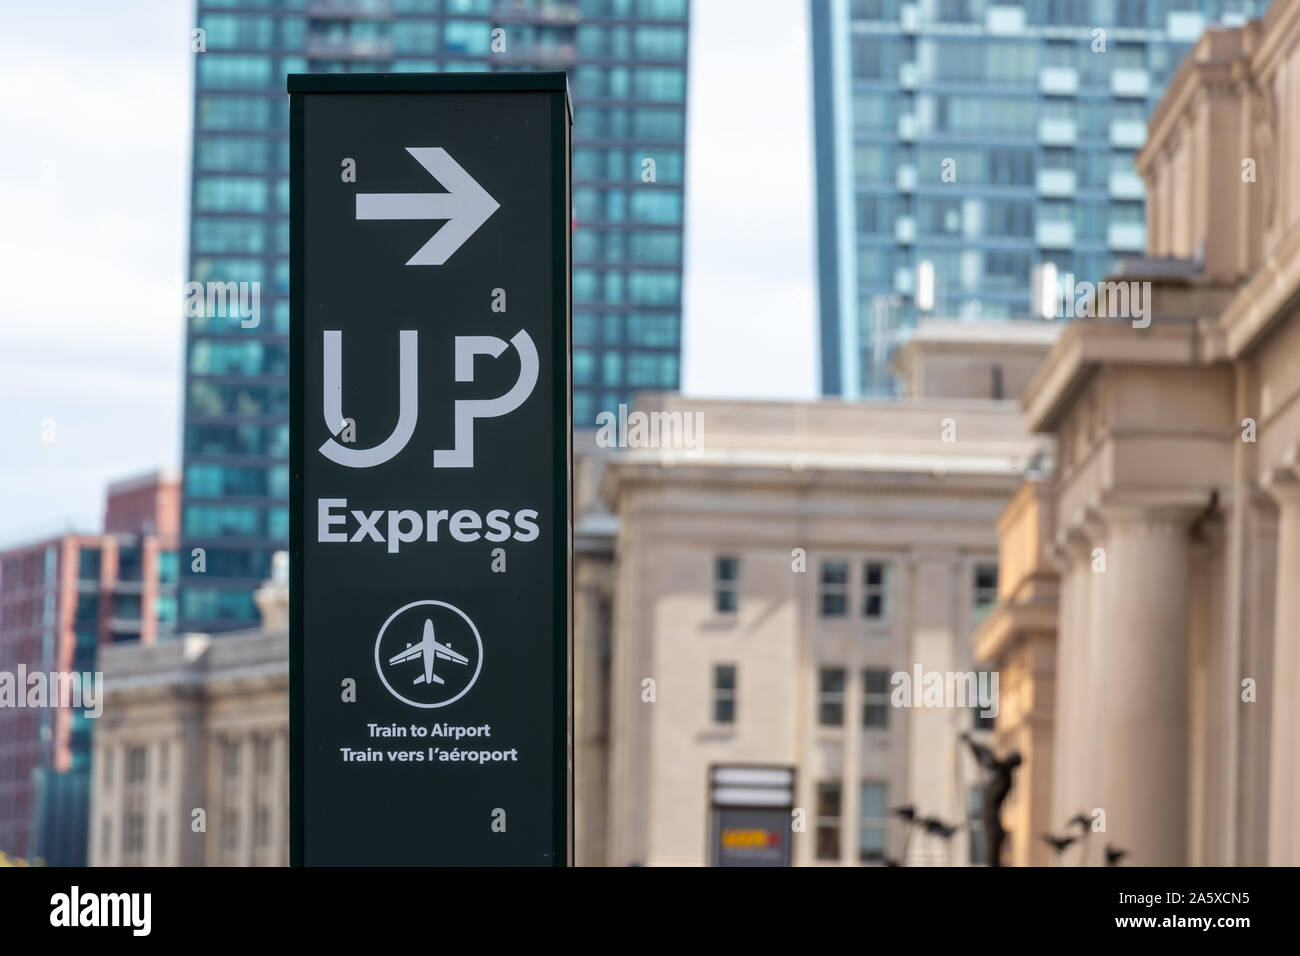 Union Pearson (UP) Express 'Train To Airport' directional sign out front of Union Station Toronto. Stock Photo